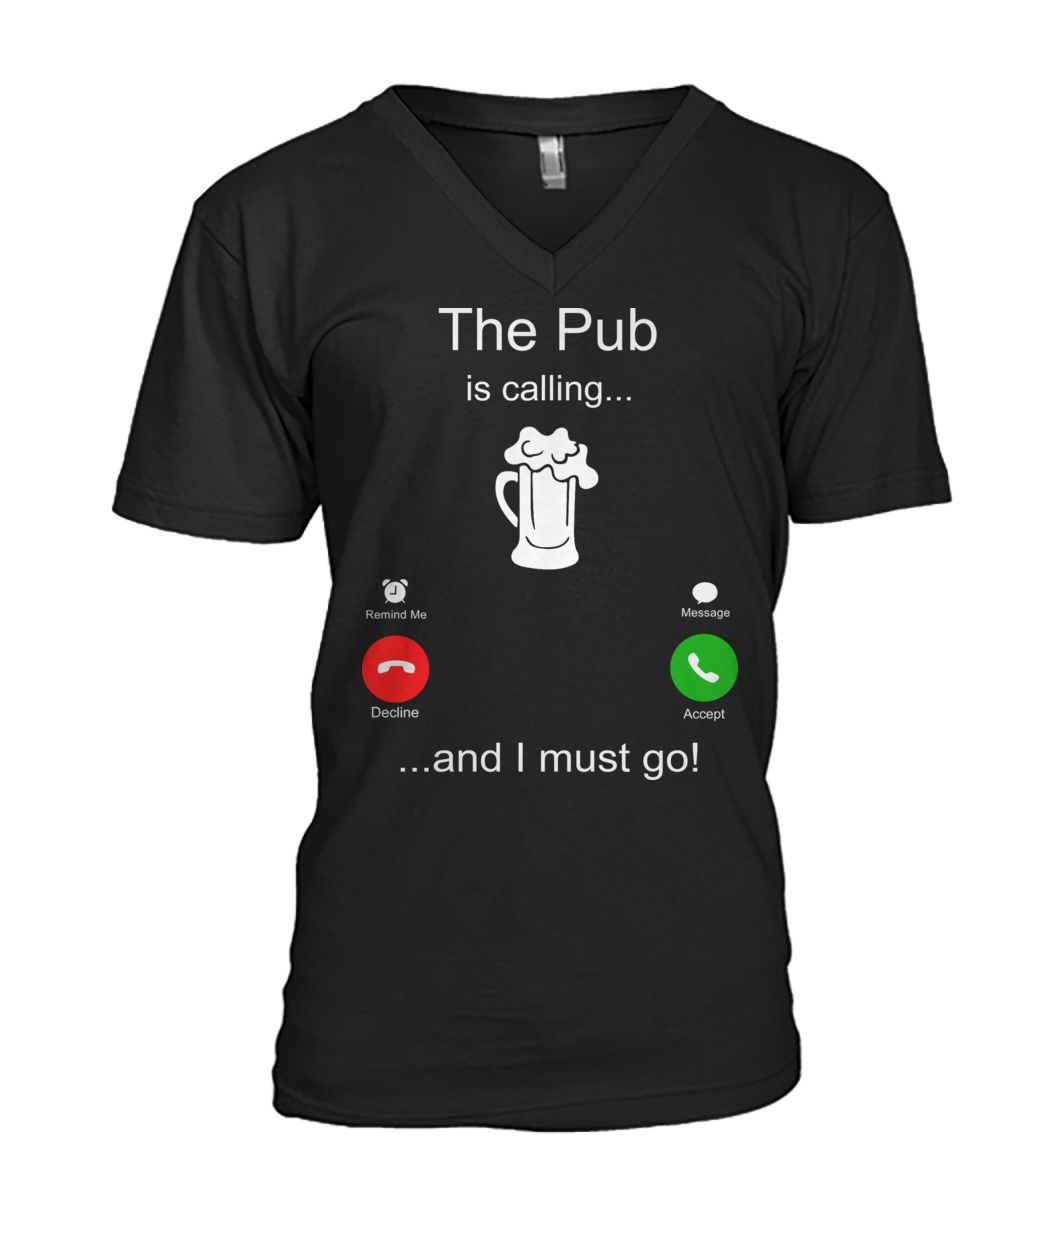 The Pub is calling and I must go mens v-neck